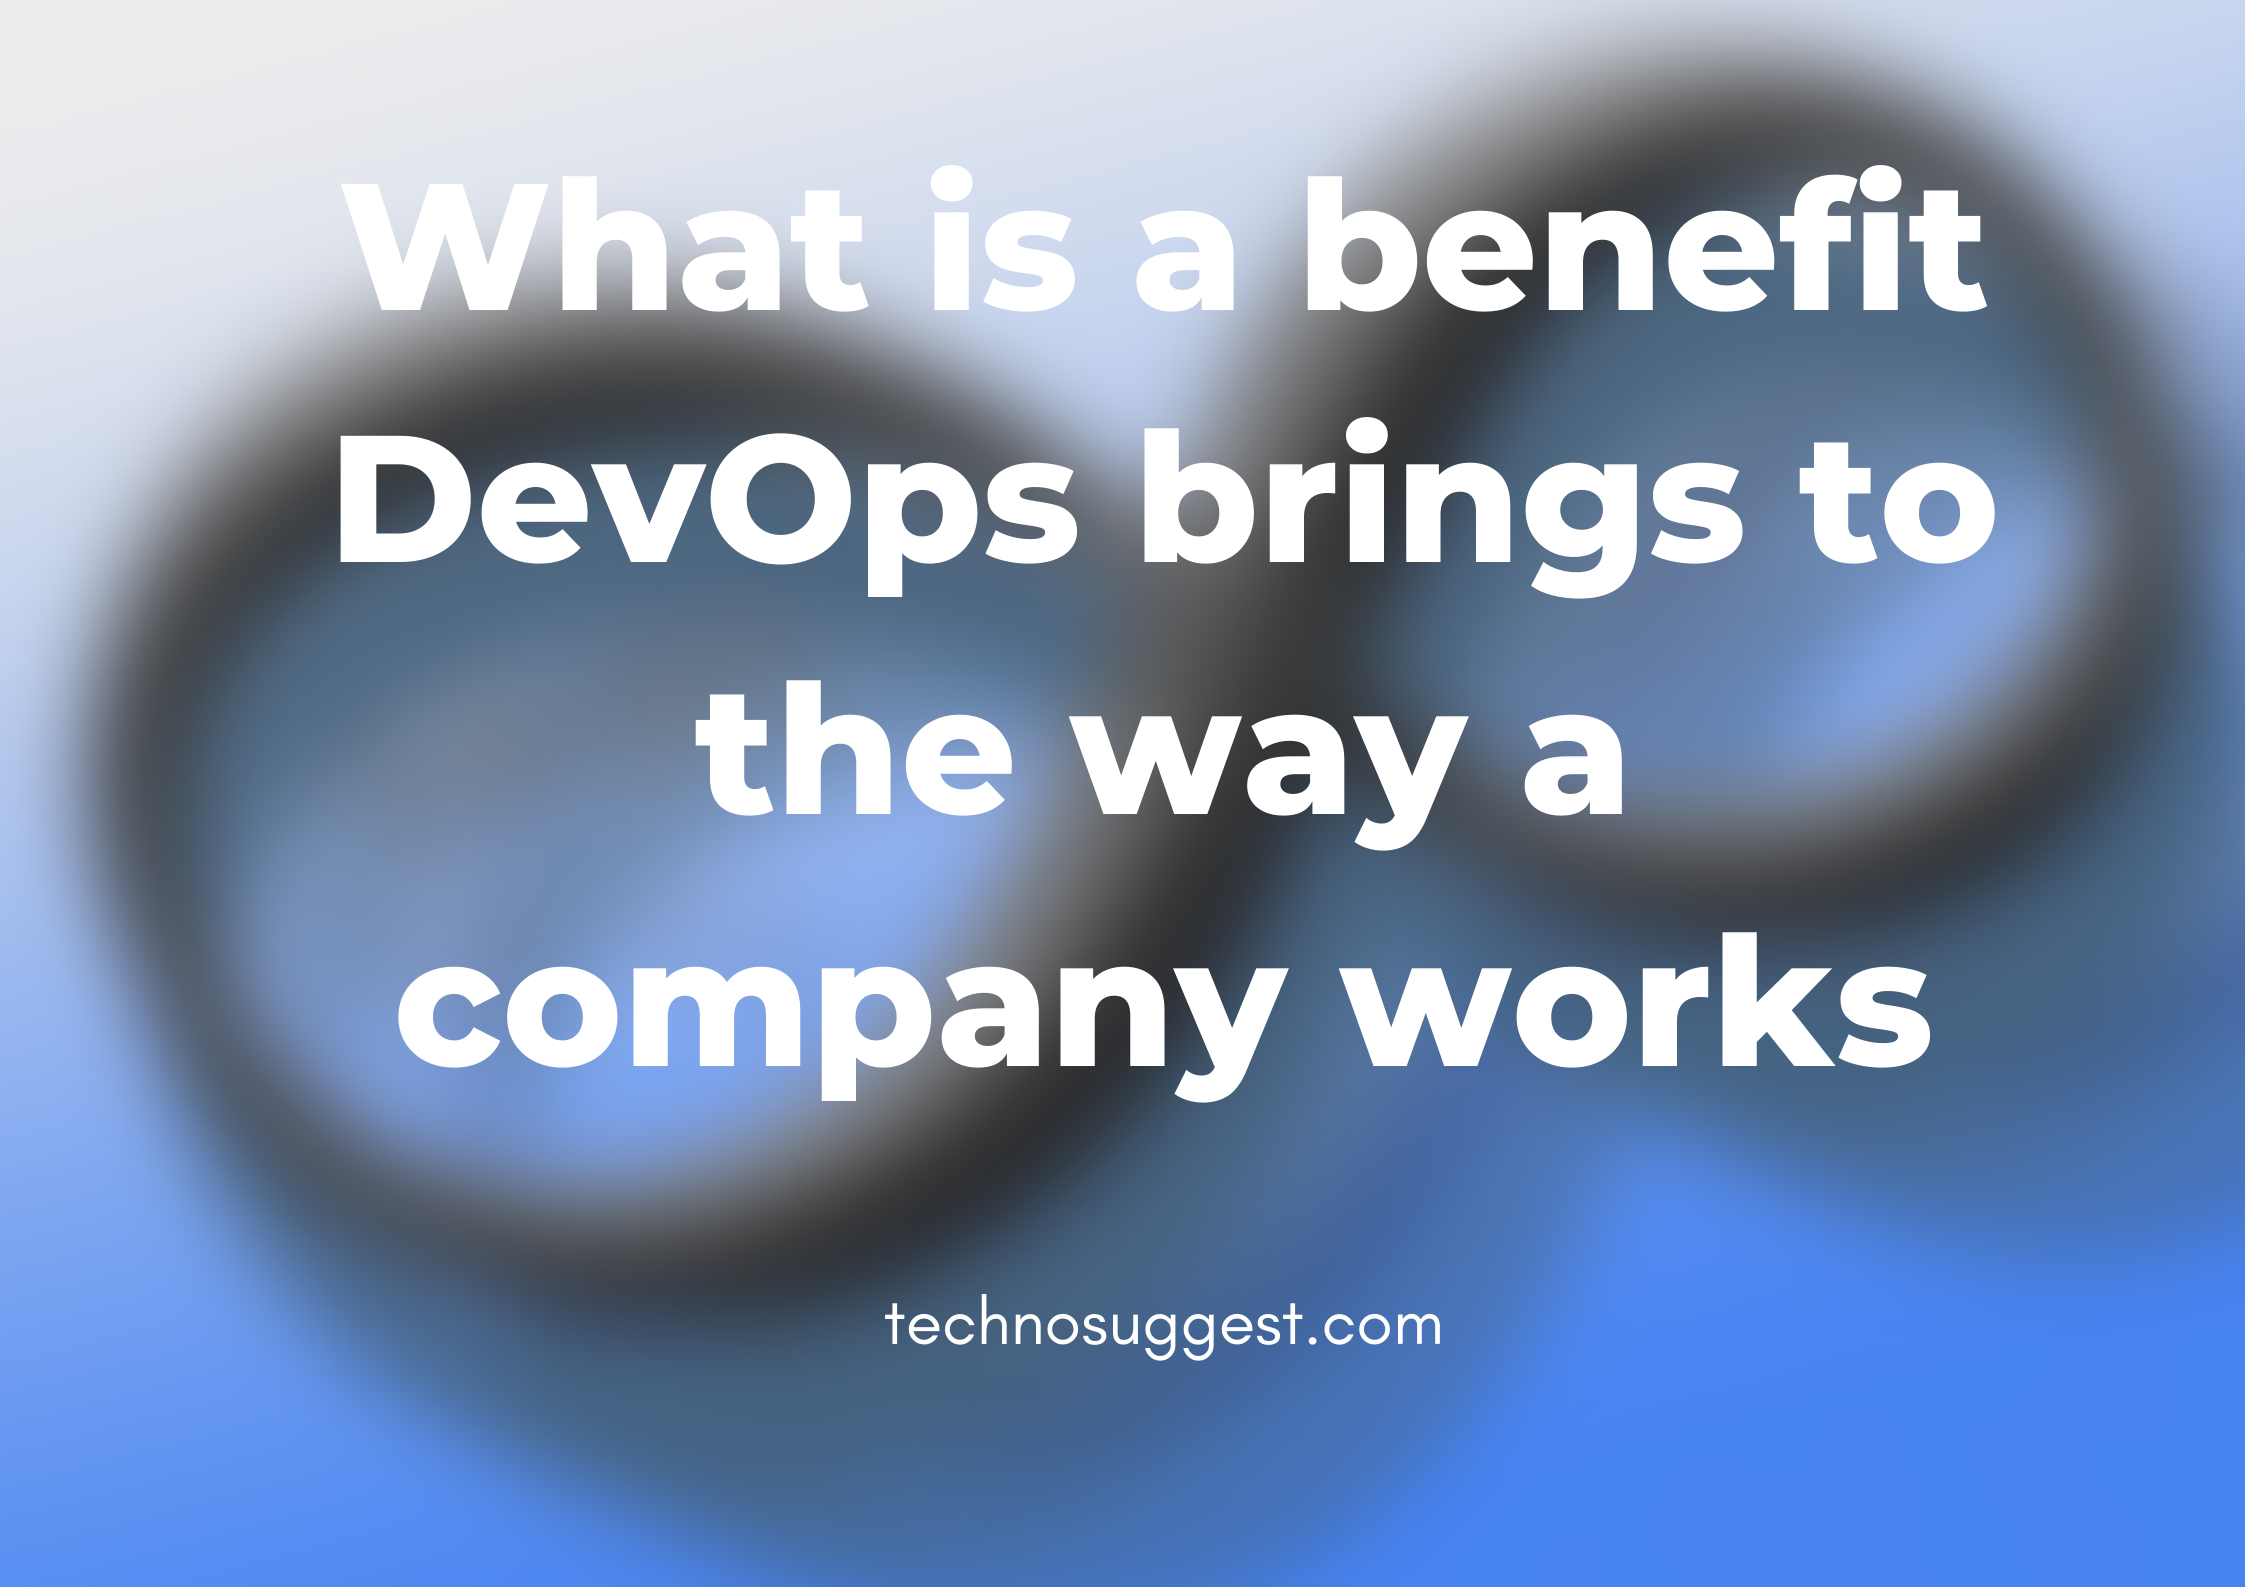 What is a benefit DevOps brings to the way a company works